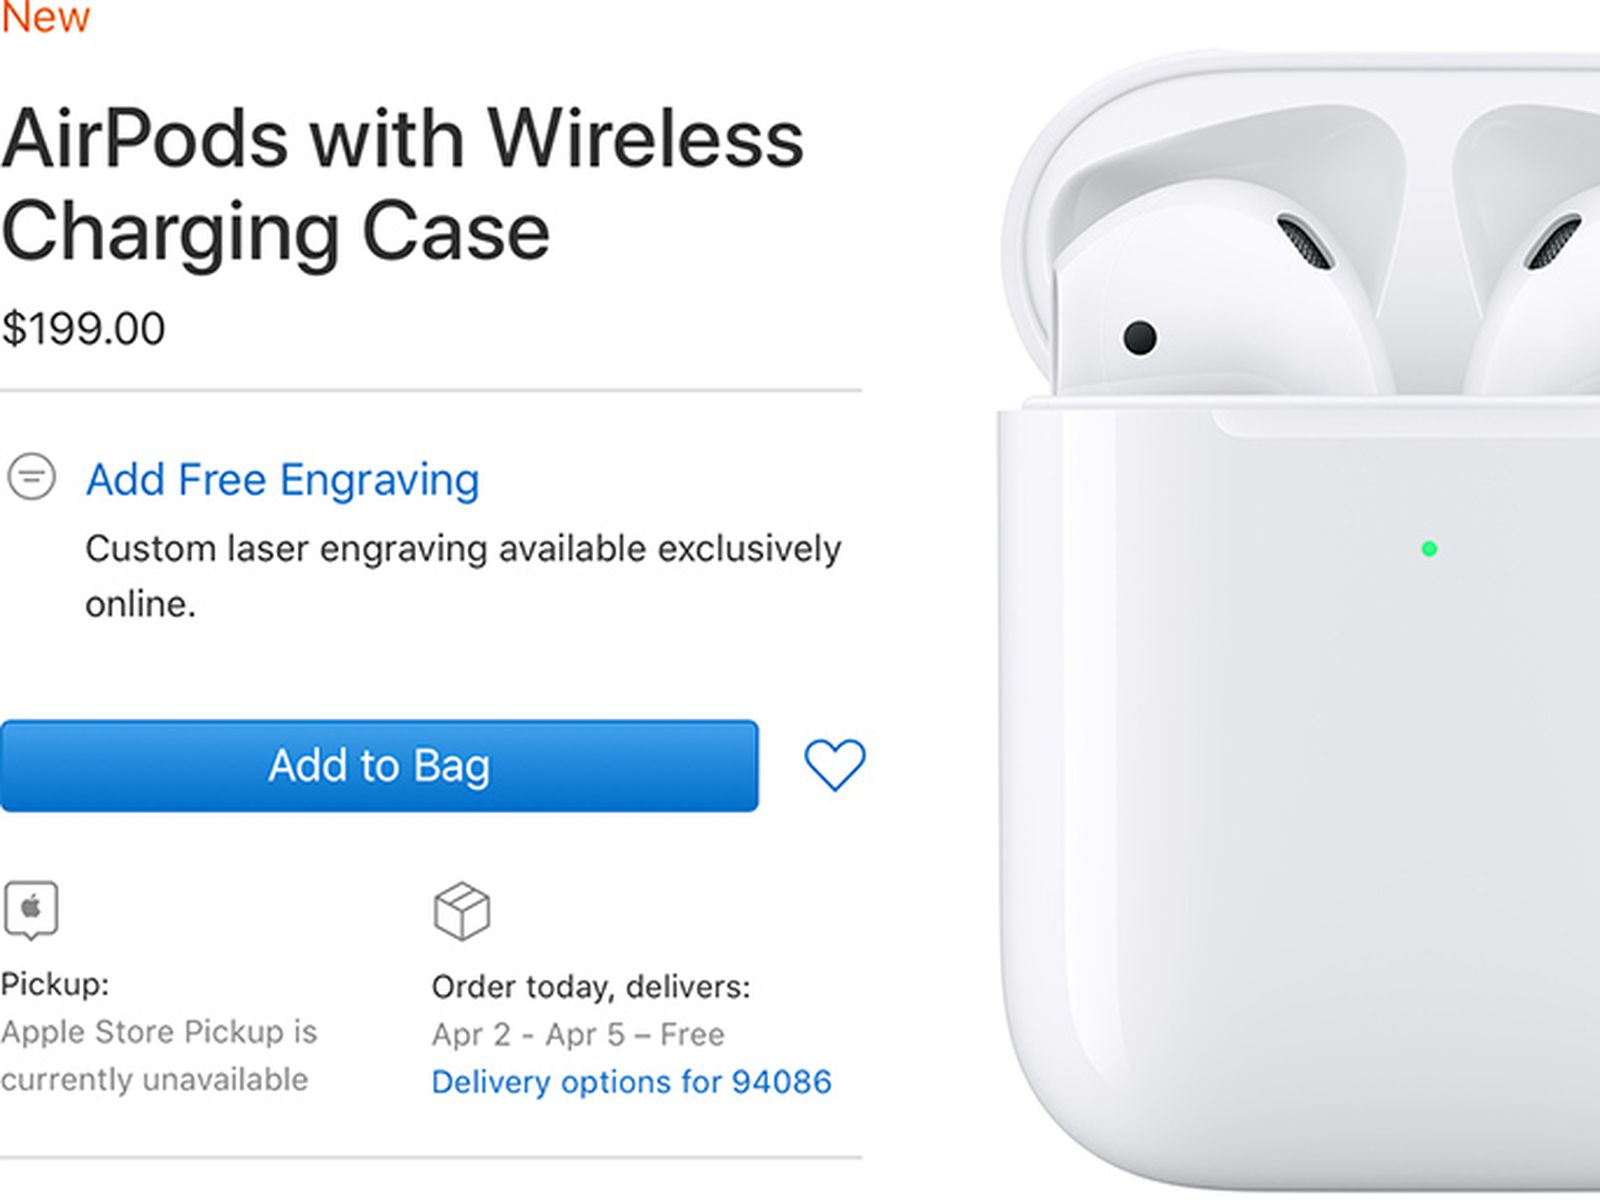 AirPods With Wireless Charging Case Delivery Date Slips to April